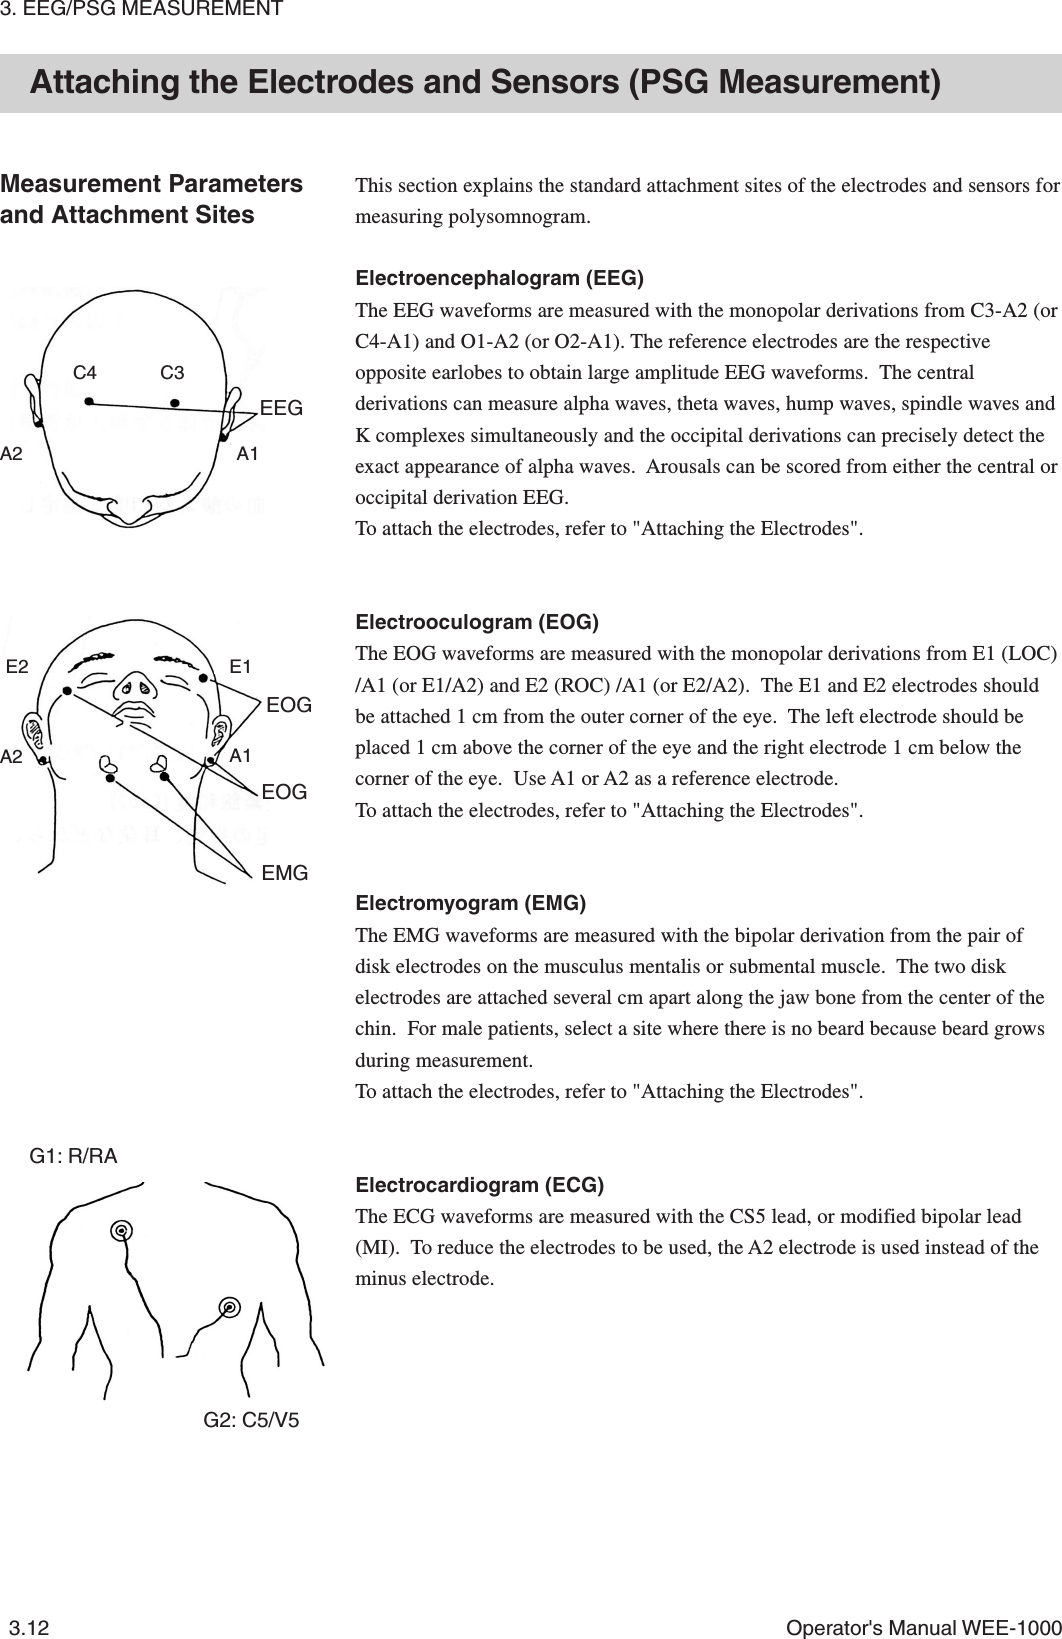 3. EEG/PSG MEASUREMENT3.12 Operator&apos;s Manual WEE-1000Attaching the Electrodes and Sensors (PSG Measurement)Measurement Parametersand Attachment SitesThis section explains the standard attachment sites of the electrodes and sensors formeasuring polysomnogram.Electroencephalogram (EEG)The EEG waveforms are measured with the monopolar derivations from C3-A2 (orC4-A1) and O1-A2 (or O2-A1). The reference electrodes are the respectiveopposite earlobes to obtain large amplitude EEG waveforms.  The centralderivations can measure alpha waves, theta waves, hump waves, spindle waves andK complexes simultaneously and the occipital derivations can precisely detect theexact appearance of alpha waves.  Arousals can be scored from either the central oroccipital derivation EEG.To attach the electrodes, refer to &quot;Attaching the Electrodes&quot;.Electrooculogram (EOG)The EOG waveforms are measured with the monopolar derivations from E1 (LOC)/A1 (or E1/A2) and E2 (ROC) /A1 (or E2/A2).  The E1 and E2 electrodes shouldbe attached 1 cm from the outer corner of the eye.  The left electrode should beplaced 1 cm above the corner of the eye and the right electrode 1 cm below thecorner of the eye.  Use A1 or A2 as a reference electrode.To attach the electrodes, refer to &quot;Attaching the Electrodes&quot;.Electromyogram (EMG)The EMG waveforms are measured with the bipolar derivation from the pair ofdisk electrodes on the musculus mentalis or submental muscle.  The two diskelectrodes are attached several cm apart along the jaw bone from the center of thechin.  For male patients, select a site where there is no beard because beard growsduring measurement.To attach the electrodes, refer to &quot;Attaching the Electrodes&quot;.Electrocardiogram (ECG)The ECG waveforms are measured with the CS5 lead, or modified bipolar lead(MI).  To reduce the electrodes to be used, the A2 electrode is used instead of theminus electrode.C3C4A2 A1EEGEOGEOGG1: R/RAG2: C5/V5E2 E1A2 A1EMG